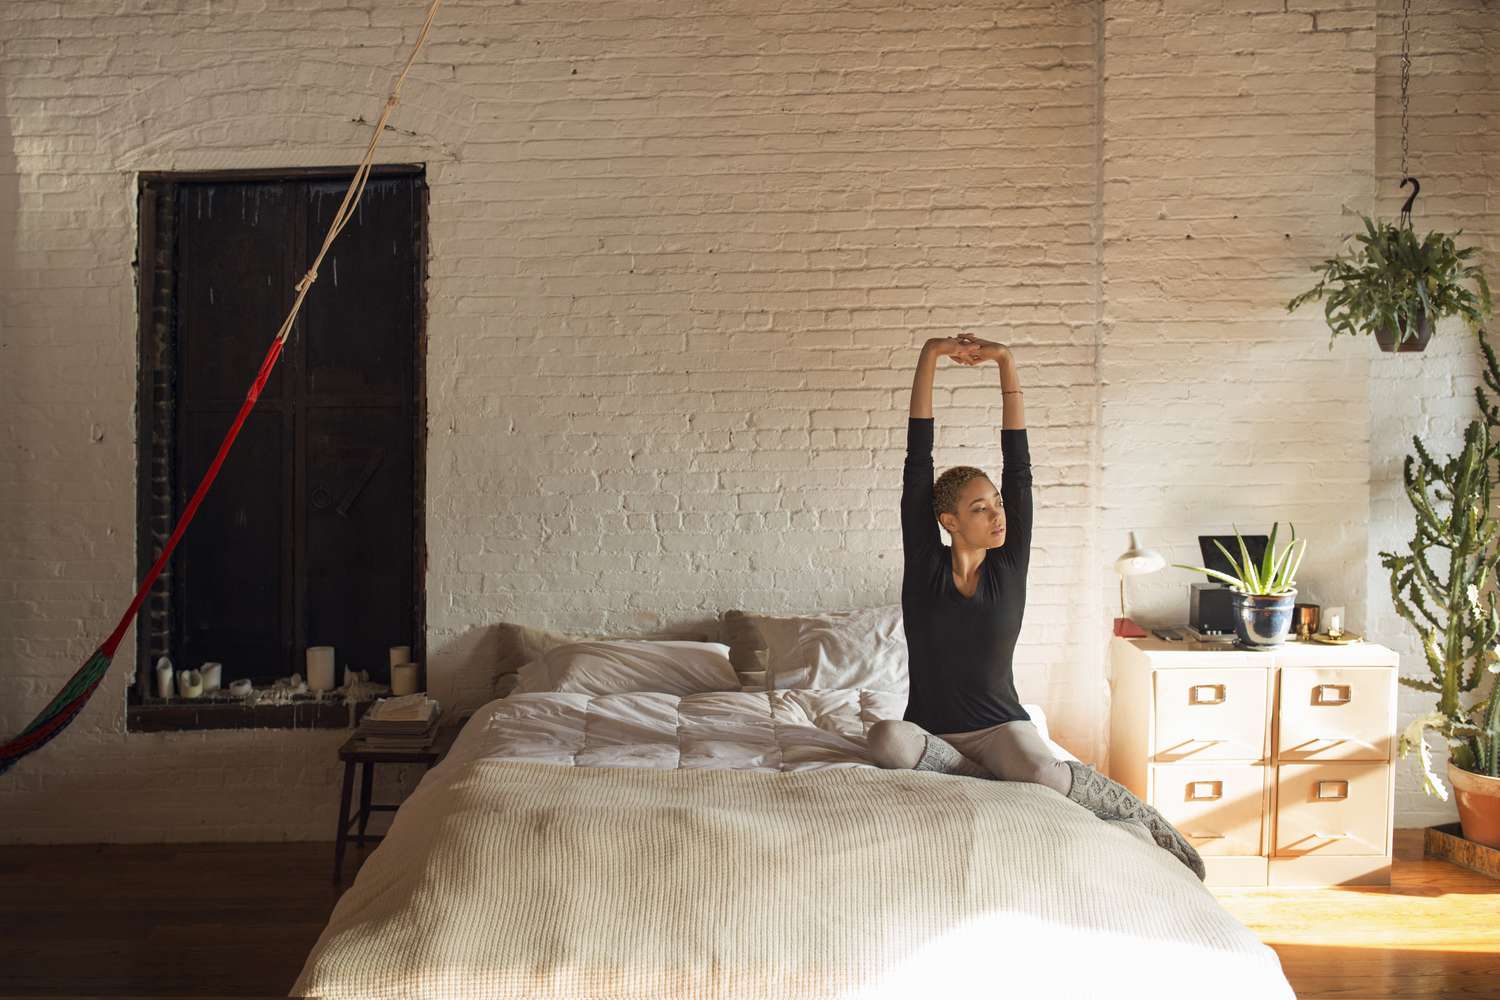 Woman waking up and stretching in bed